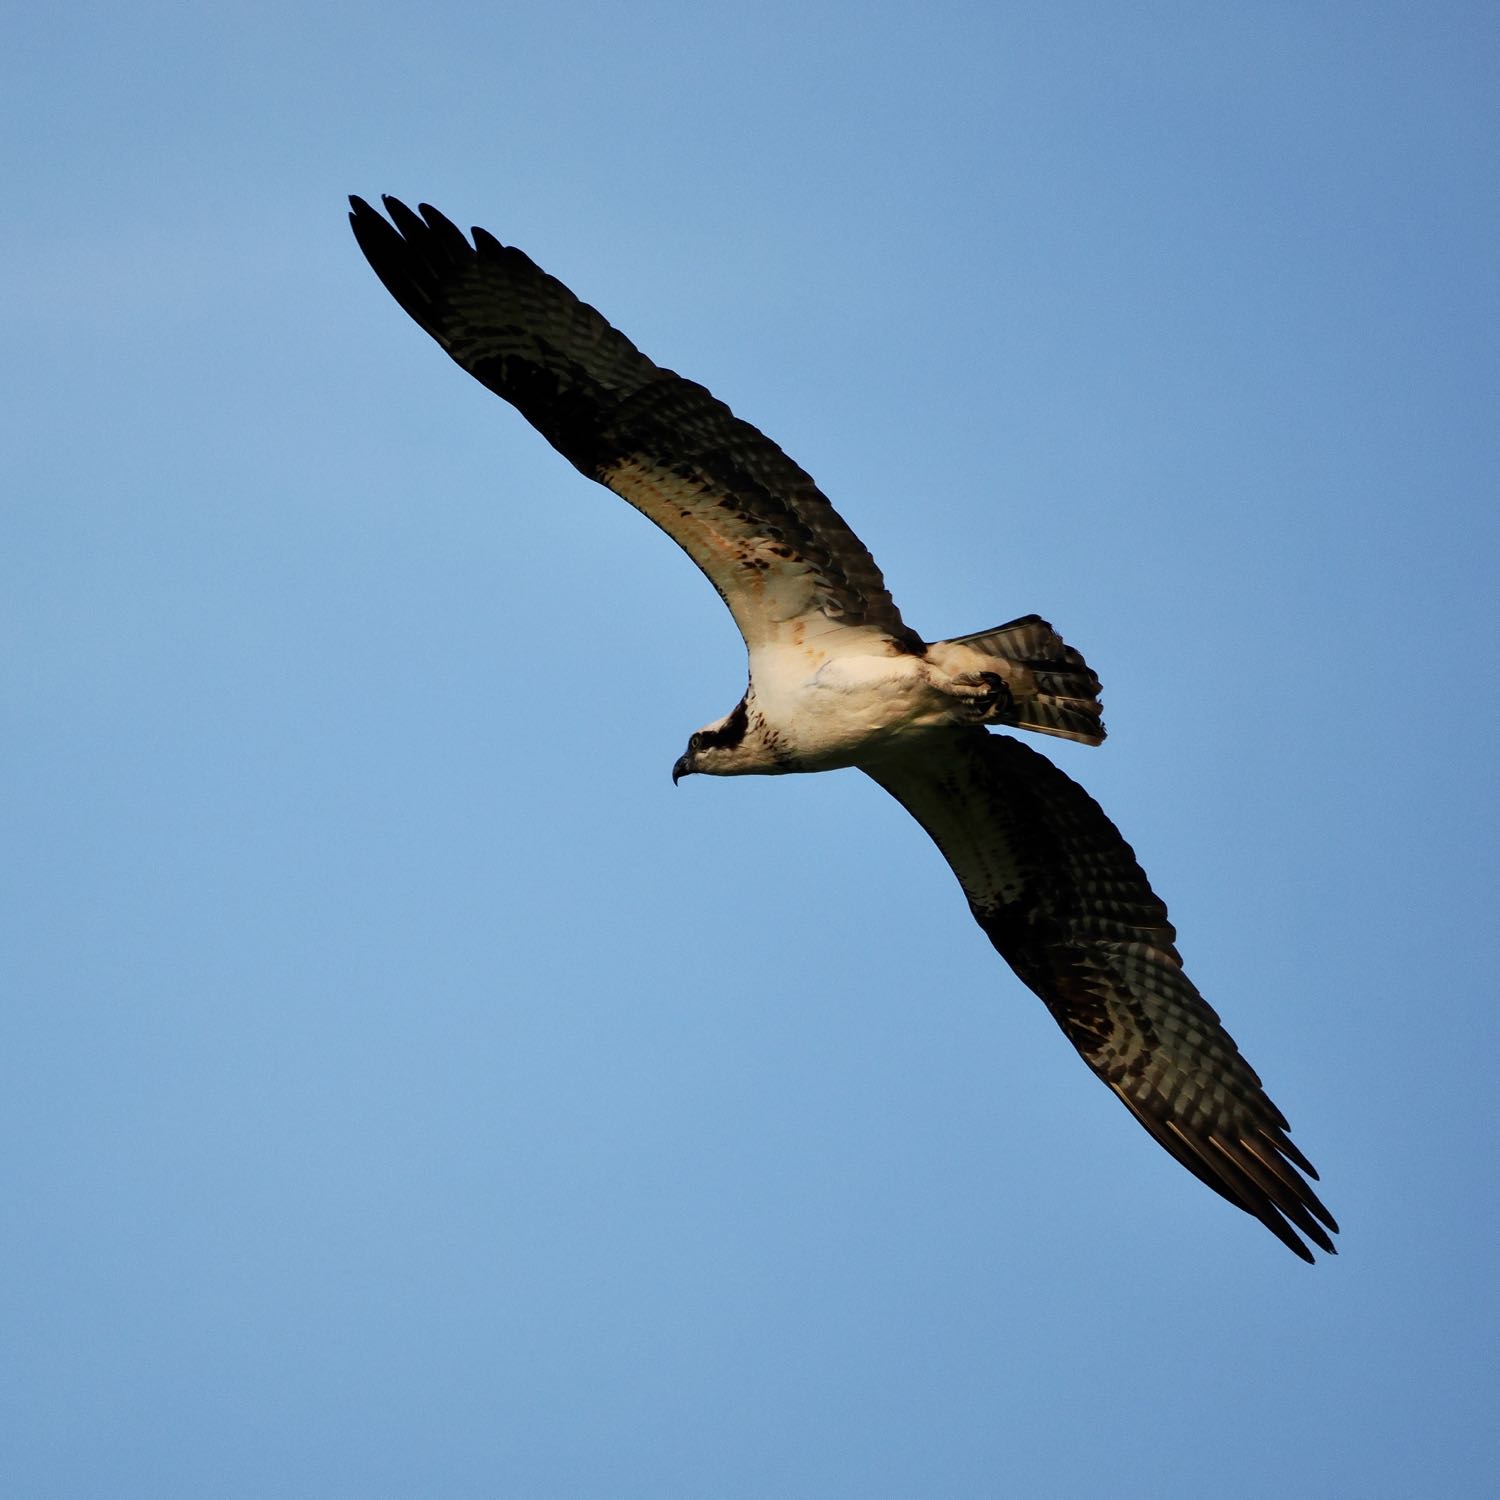 Another Osprey in flight with its wings spread wide.